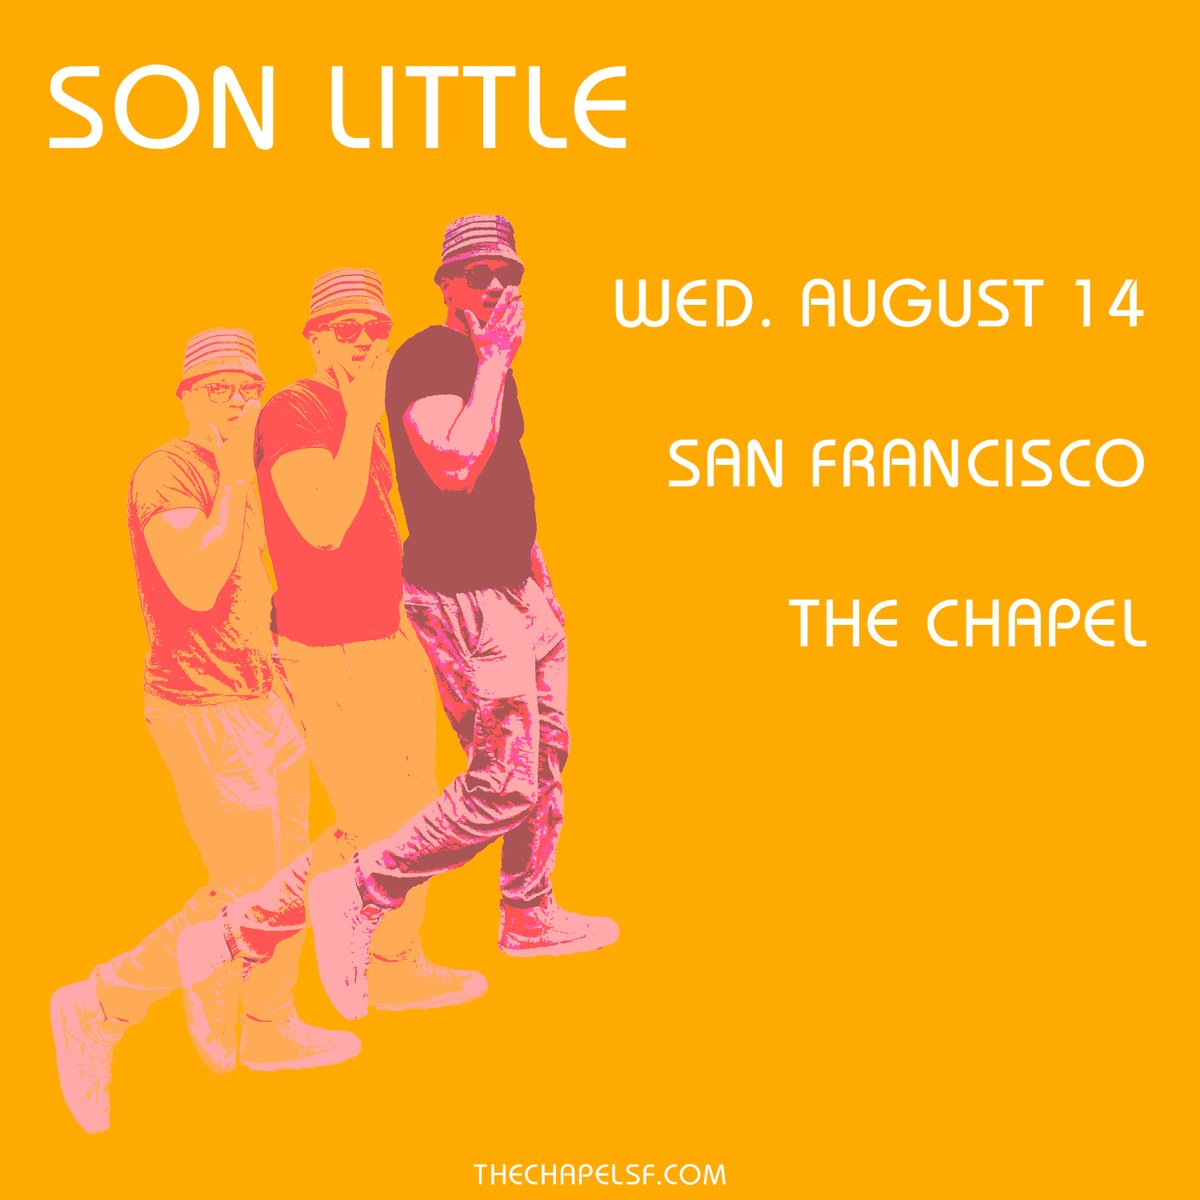 Just Announced! Son Little is heading to The Chapel on Wednesday, August 14. Tickets are on sale this Friday at 10am: tinyurl.com/mryt932c